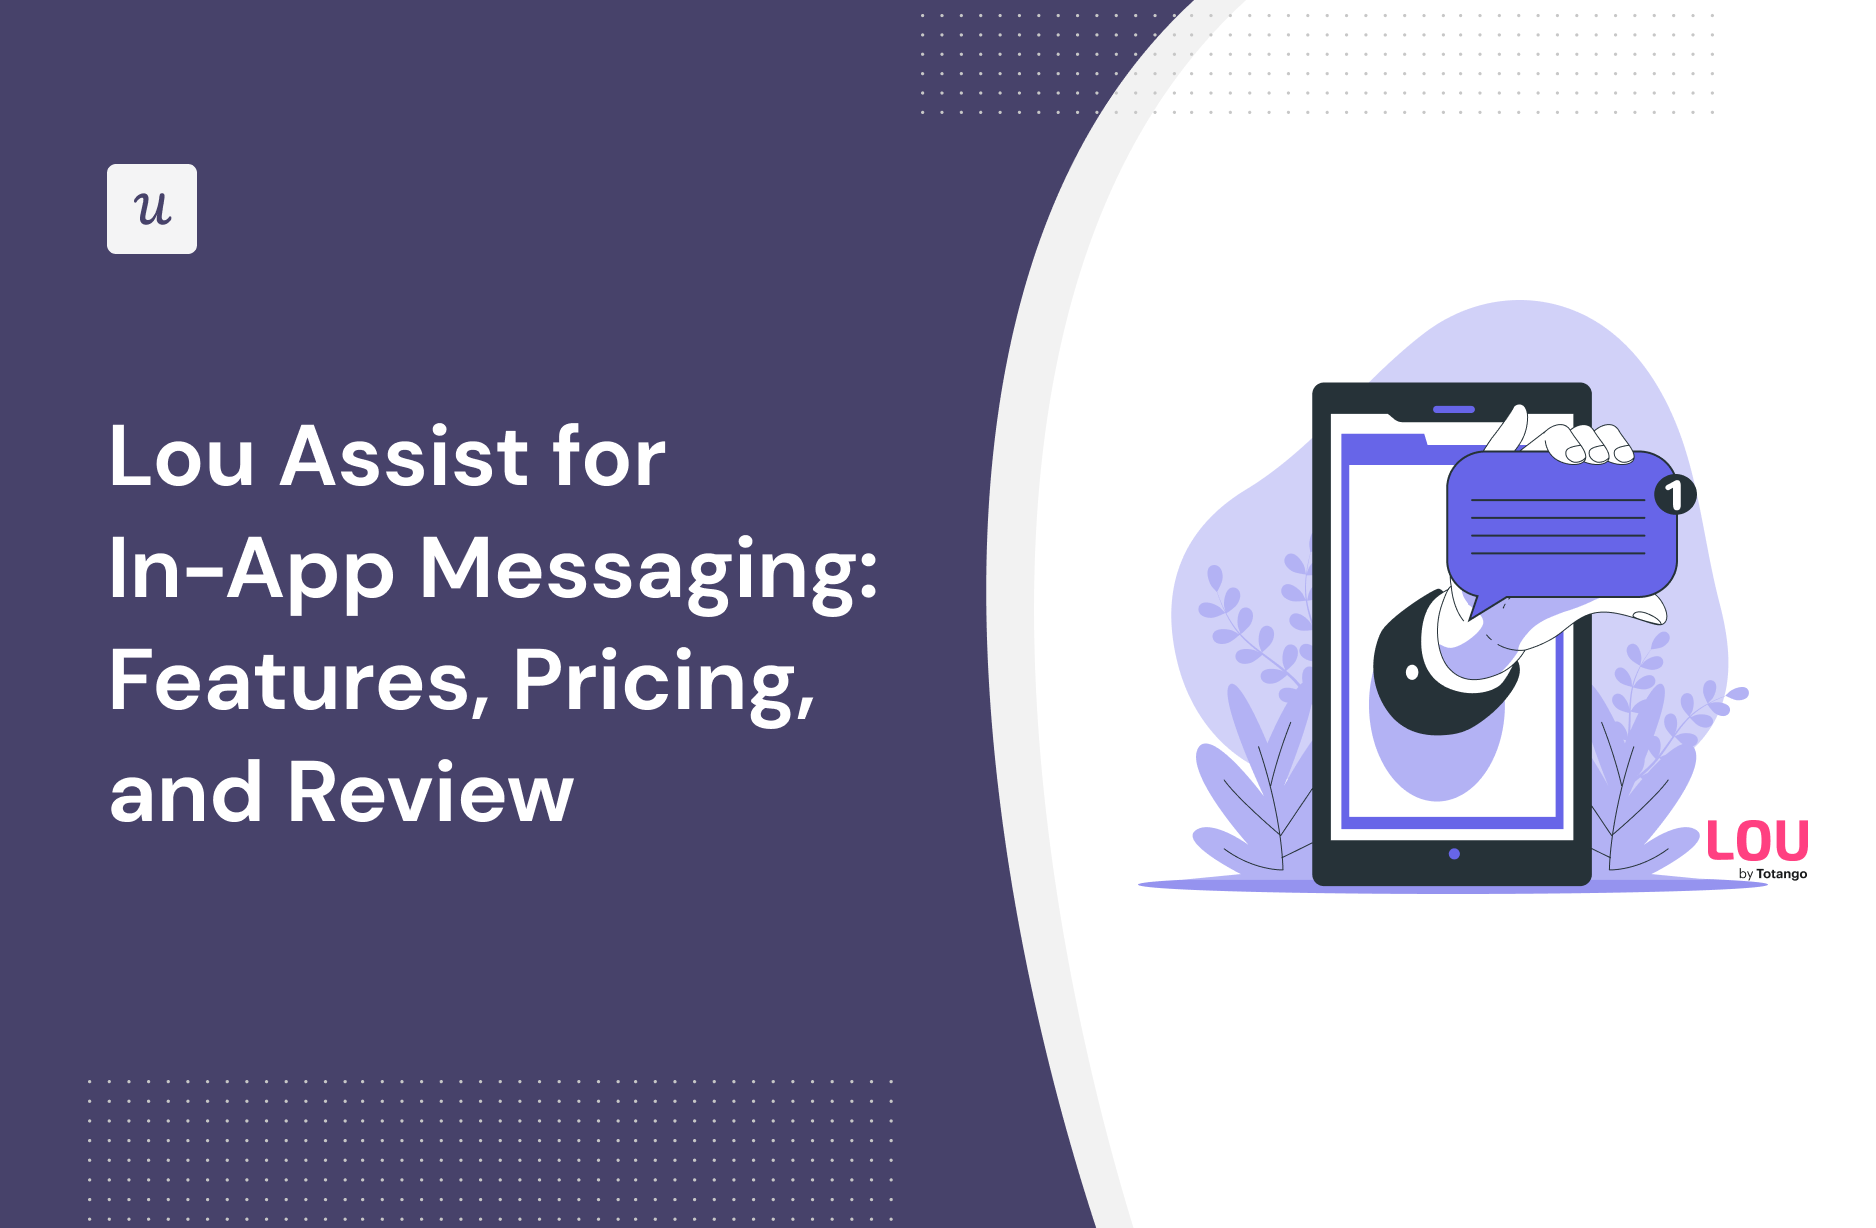 Lou Assist for In-App Messaging: Features, Pricing, and Review